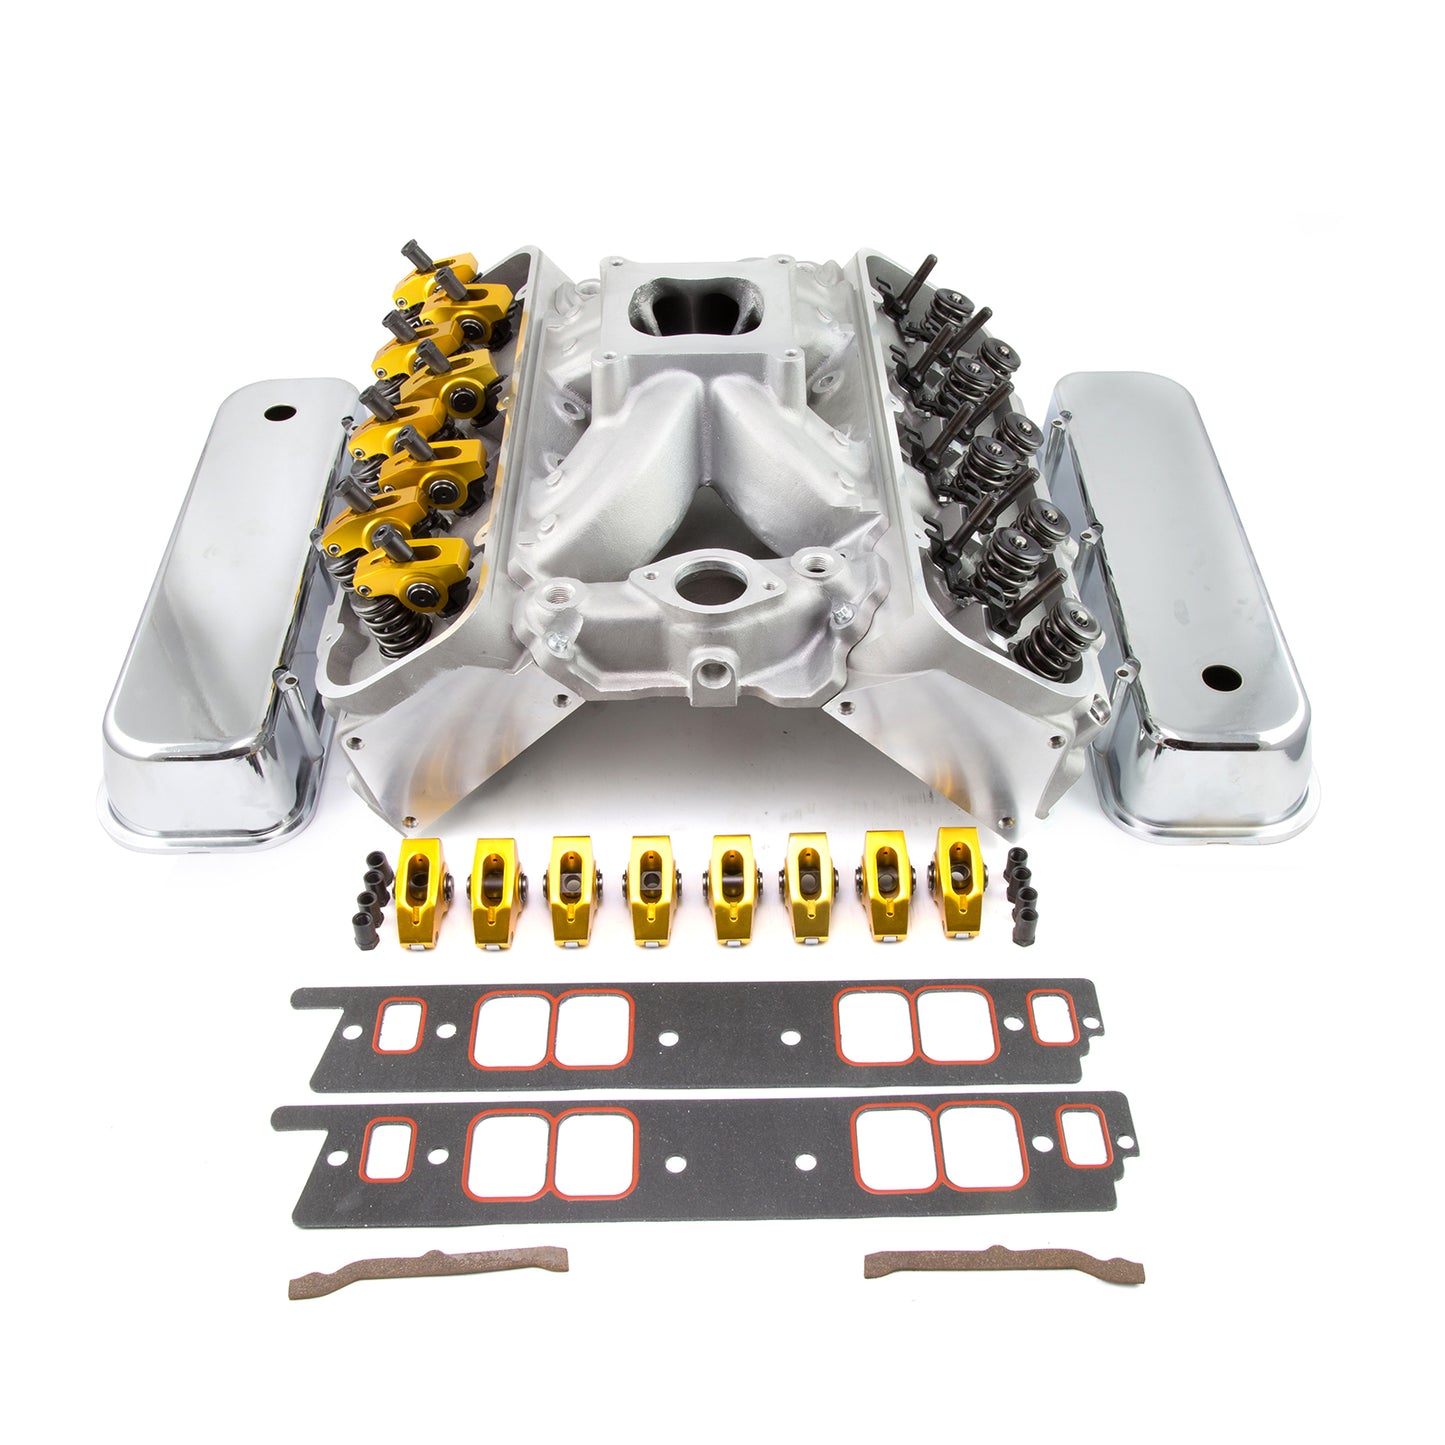 Speedmaster PCE435.1019 Fits Chevy BBC 454 Solid FT CNC Cylinder Head Top End Engine Combo Kit